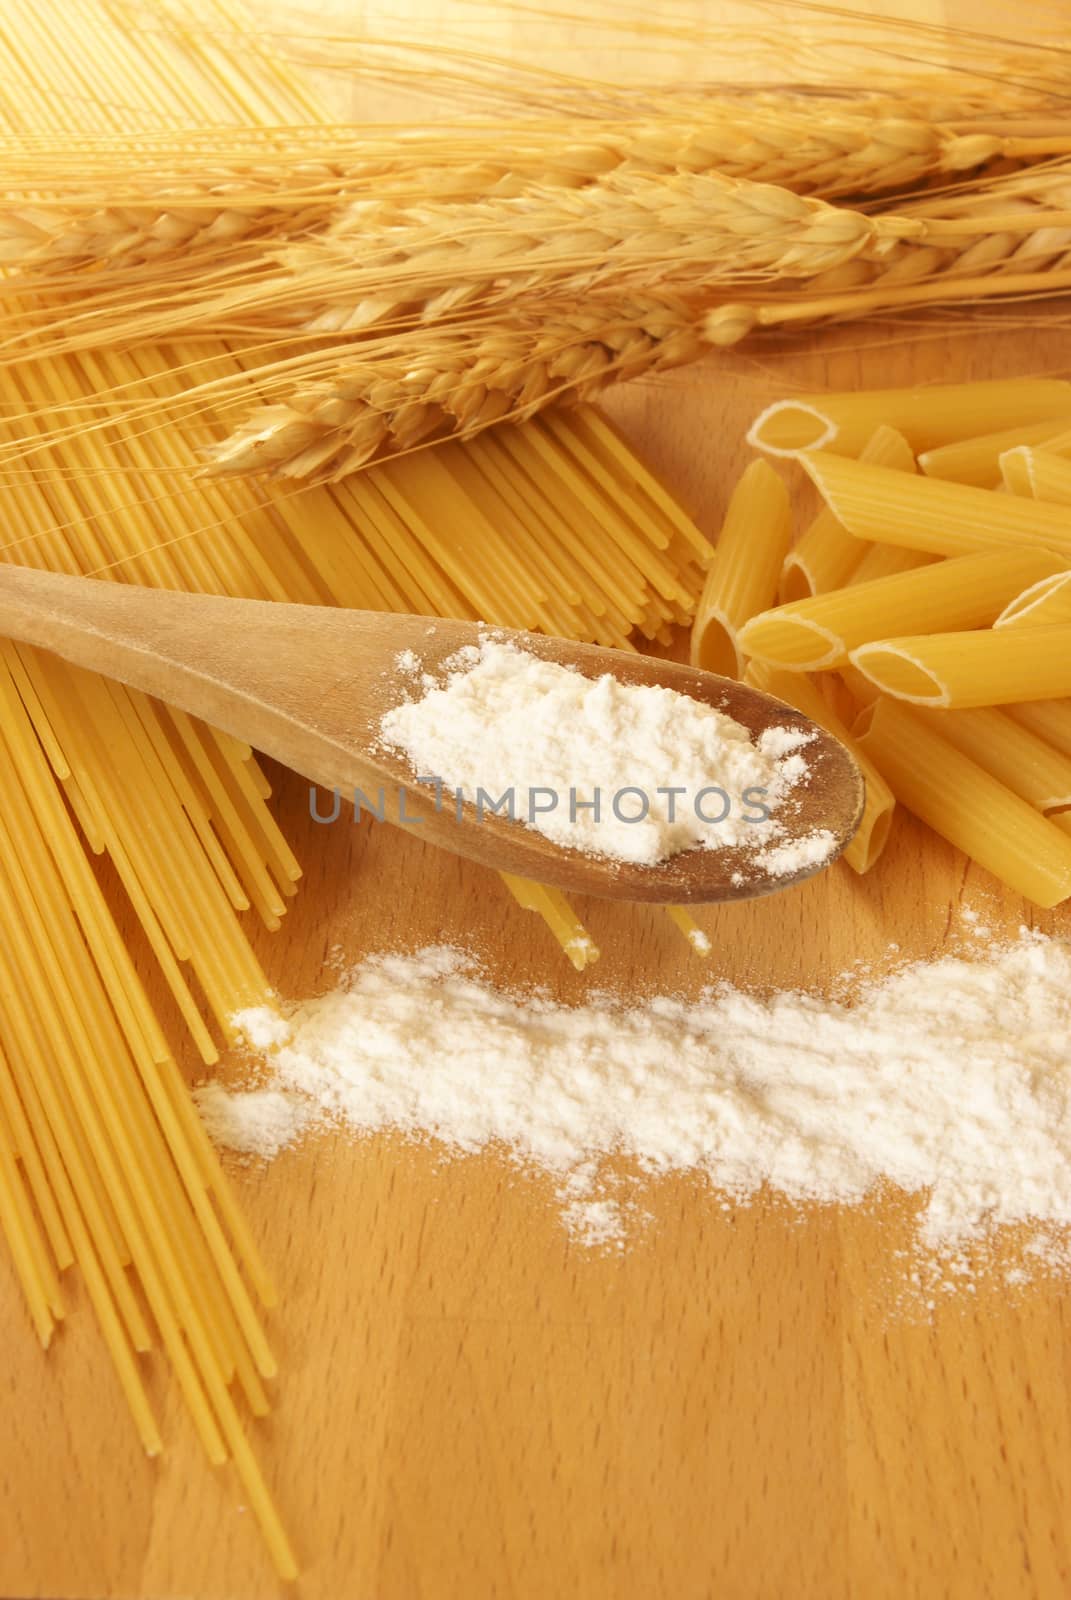 A photo of pasta and wheat up close in the kitchen.